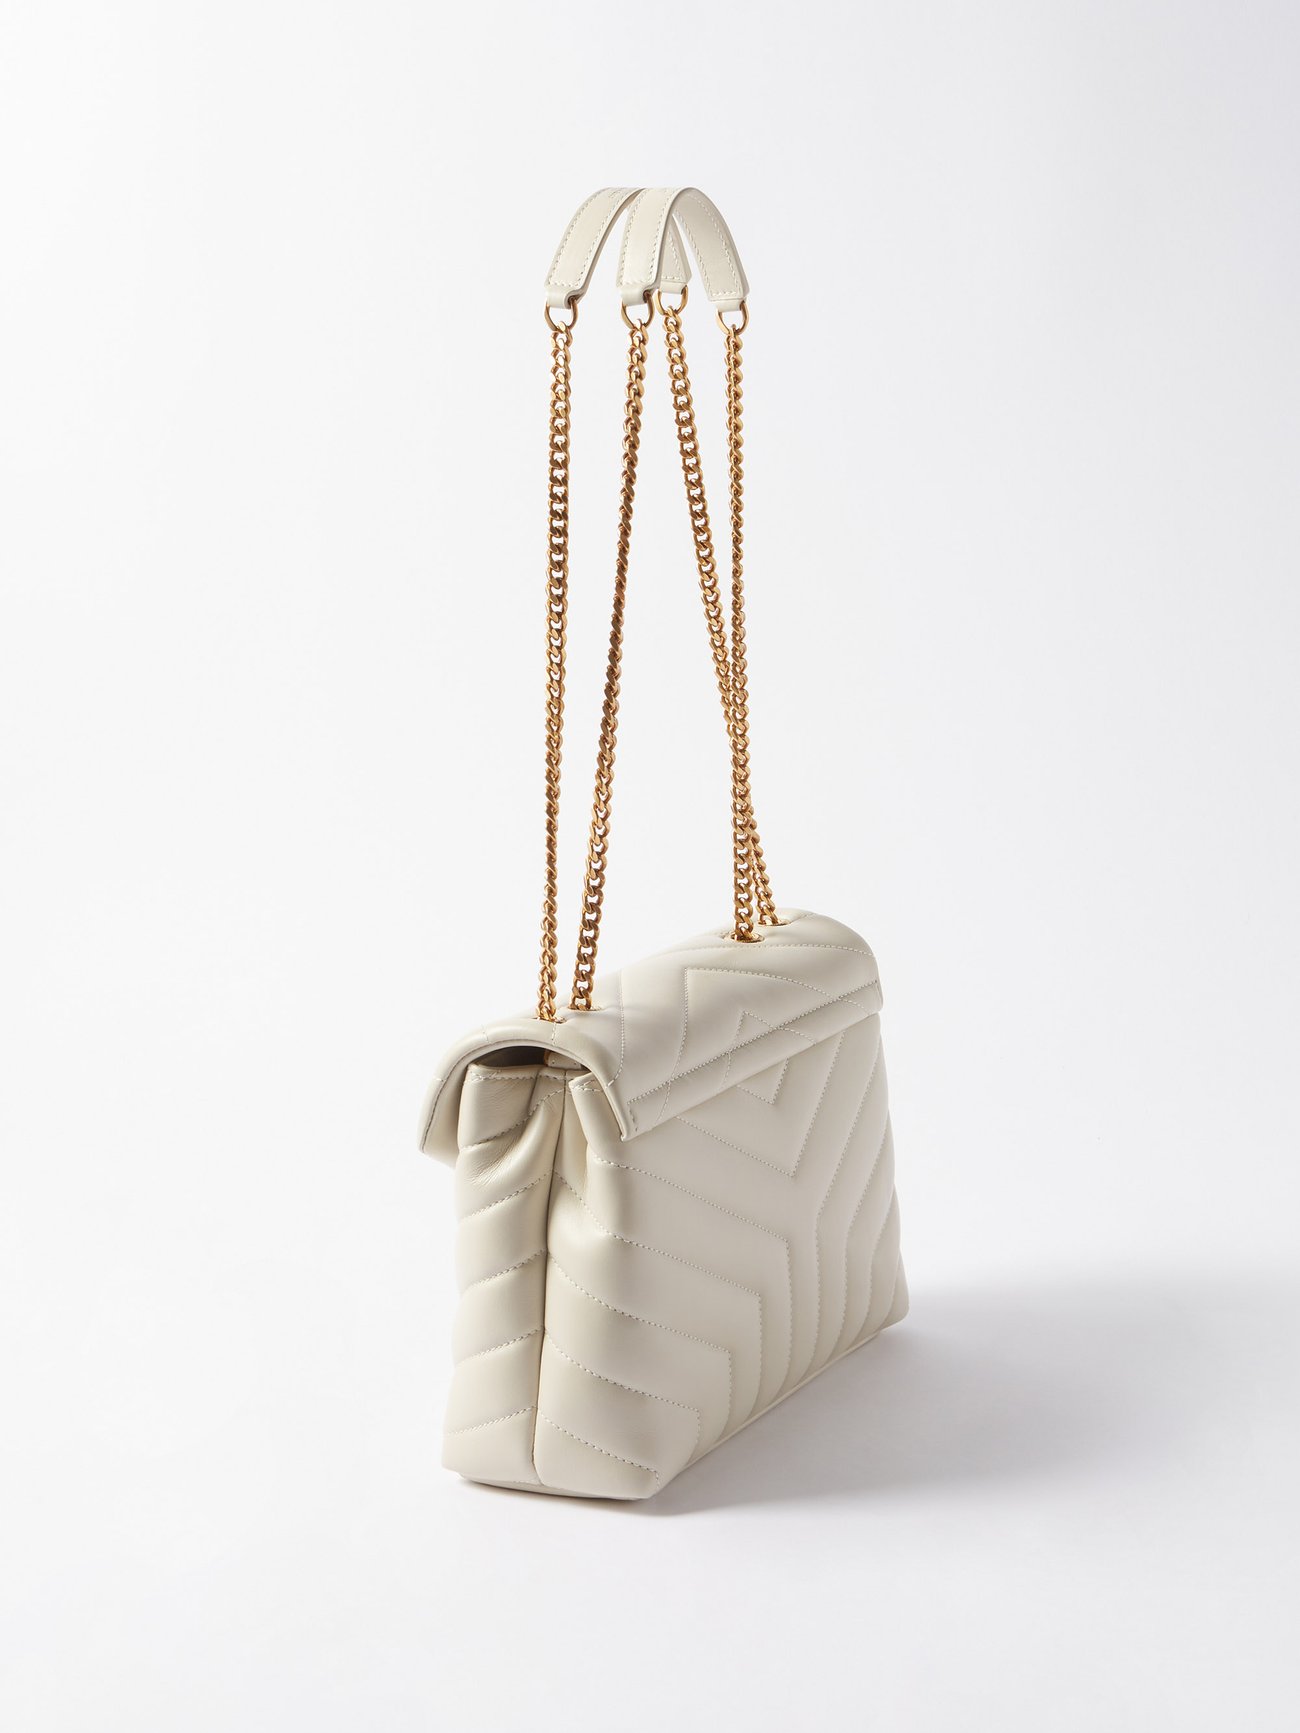 White Loulou small quilted leather shoulder bag